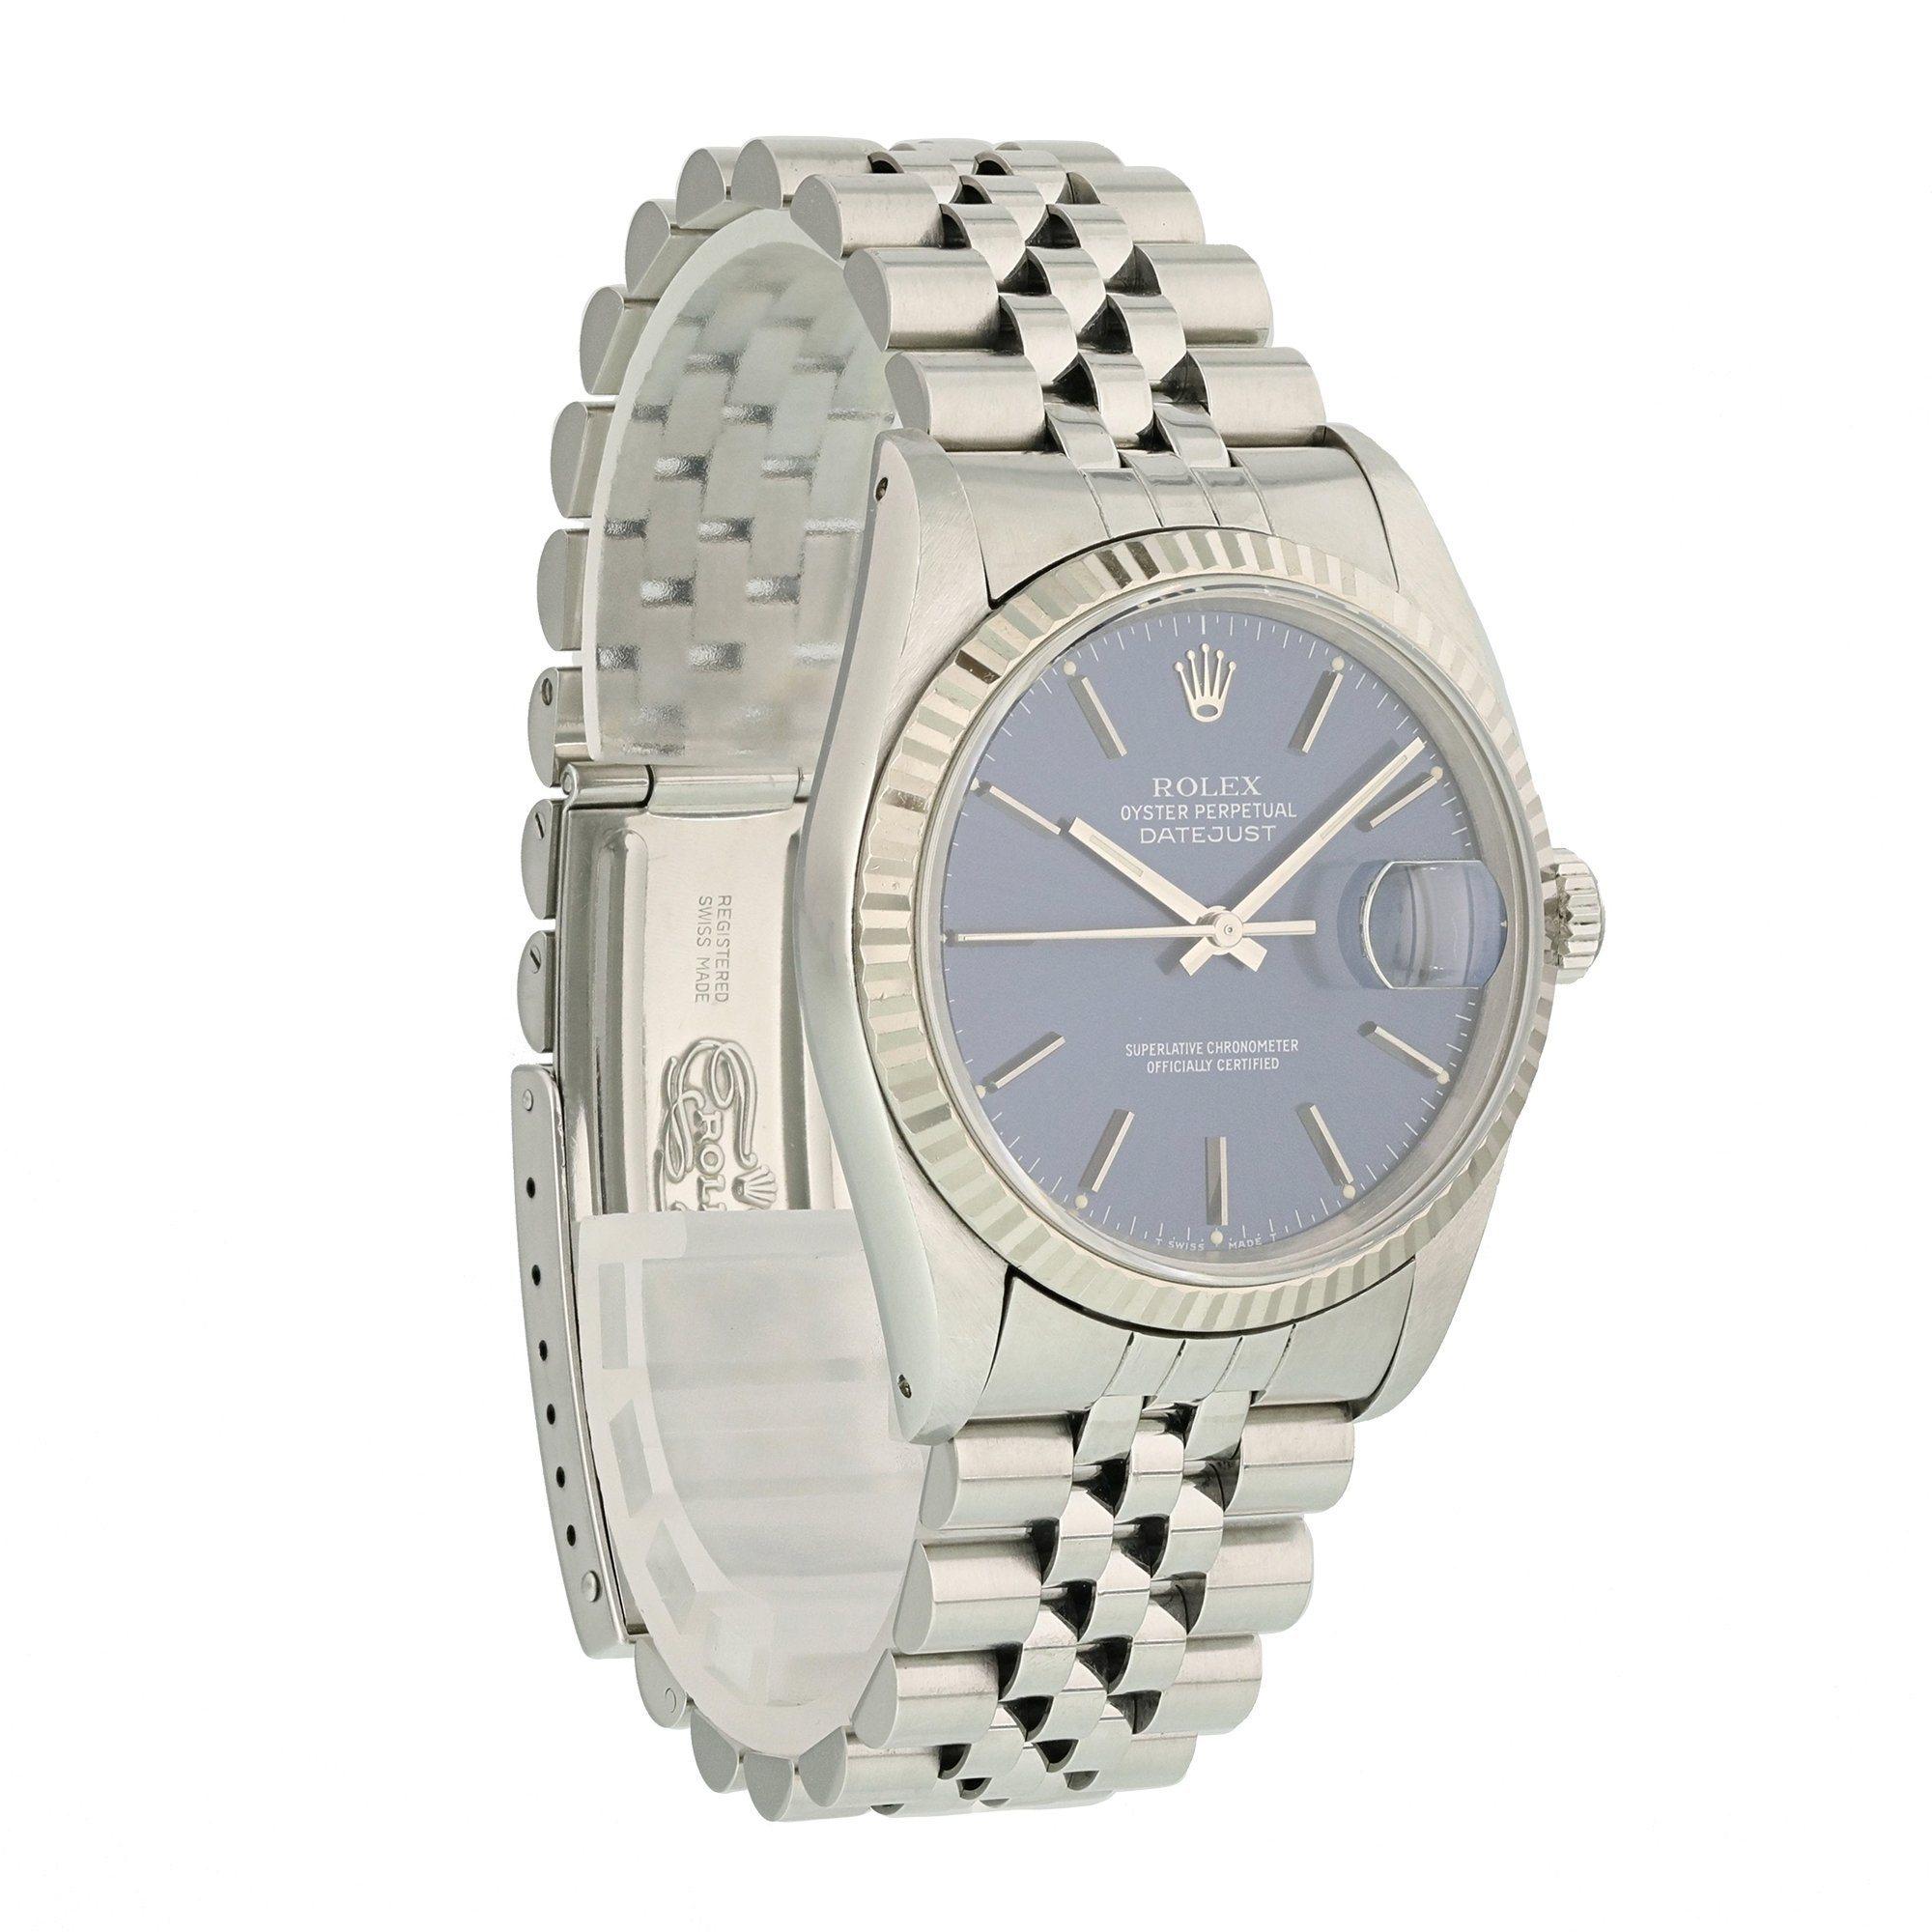 Rolex Oyster Perpetual Datejust 16234 Men's Watch For Sale 1